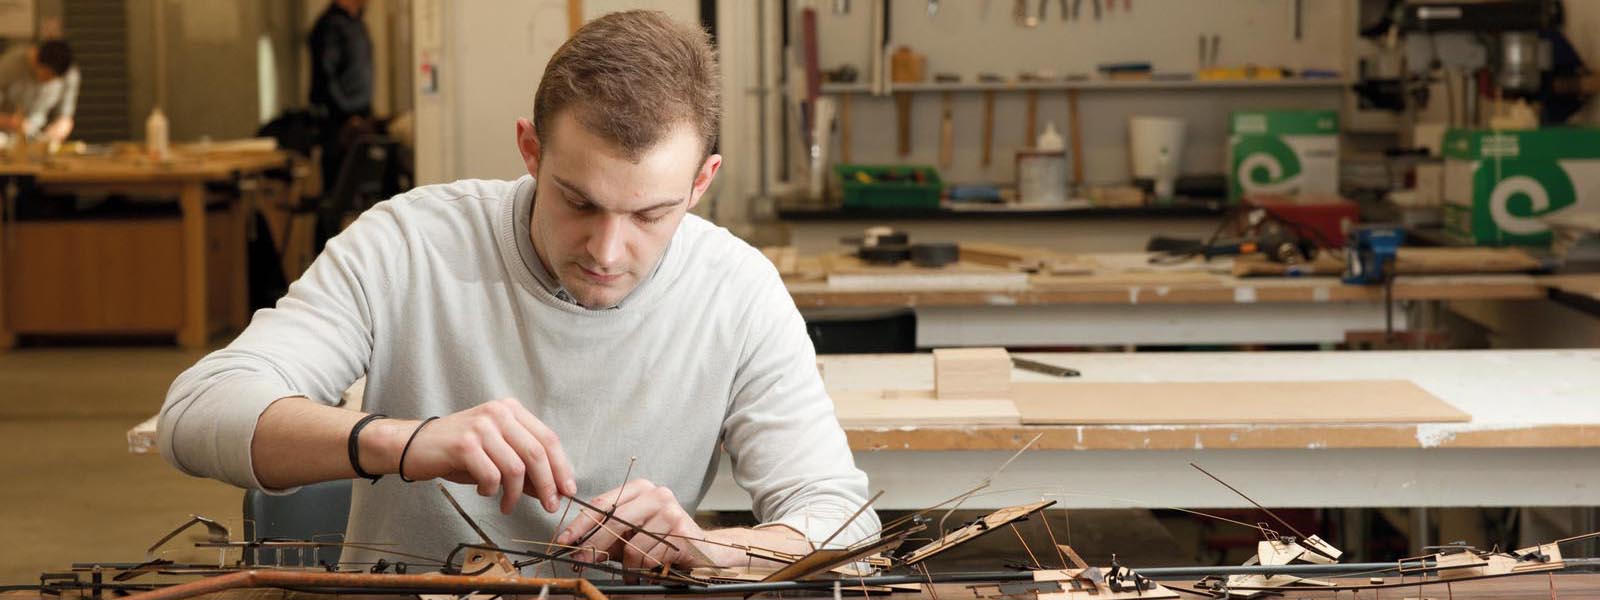 Male student working on a model in the workshop